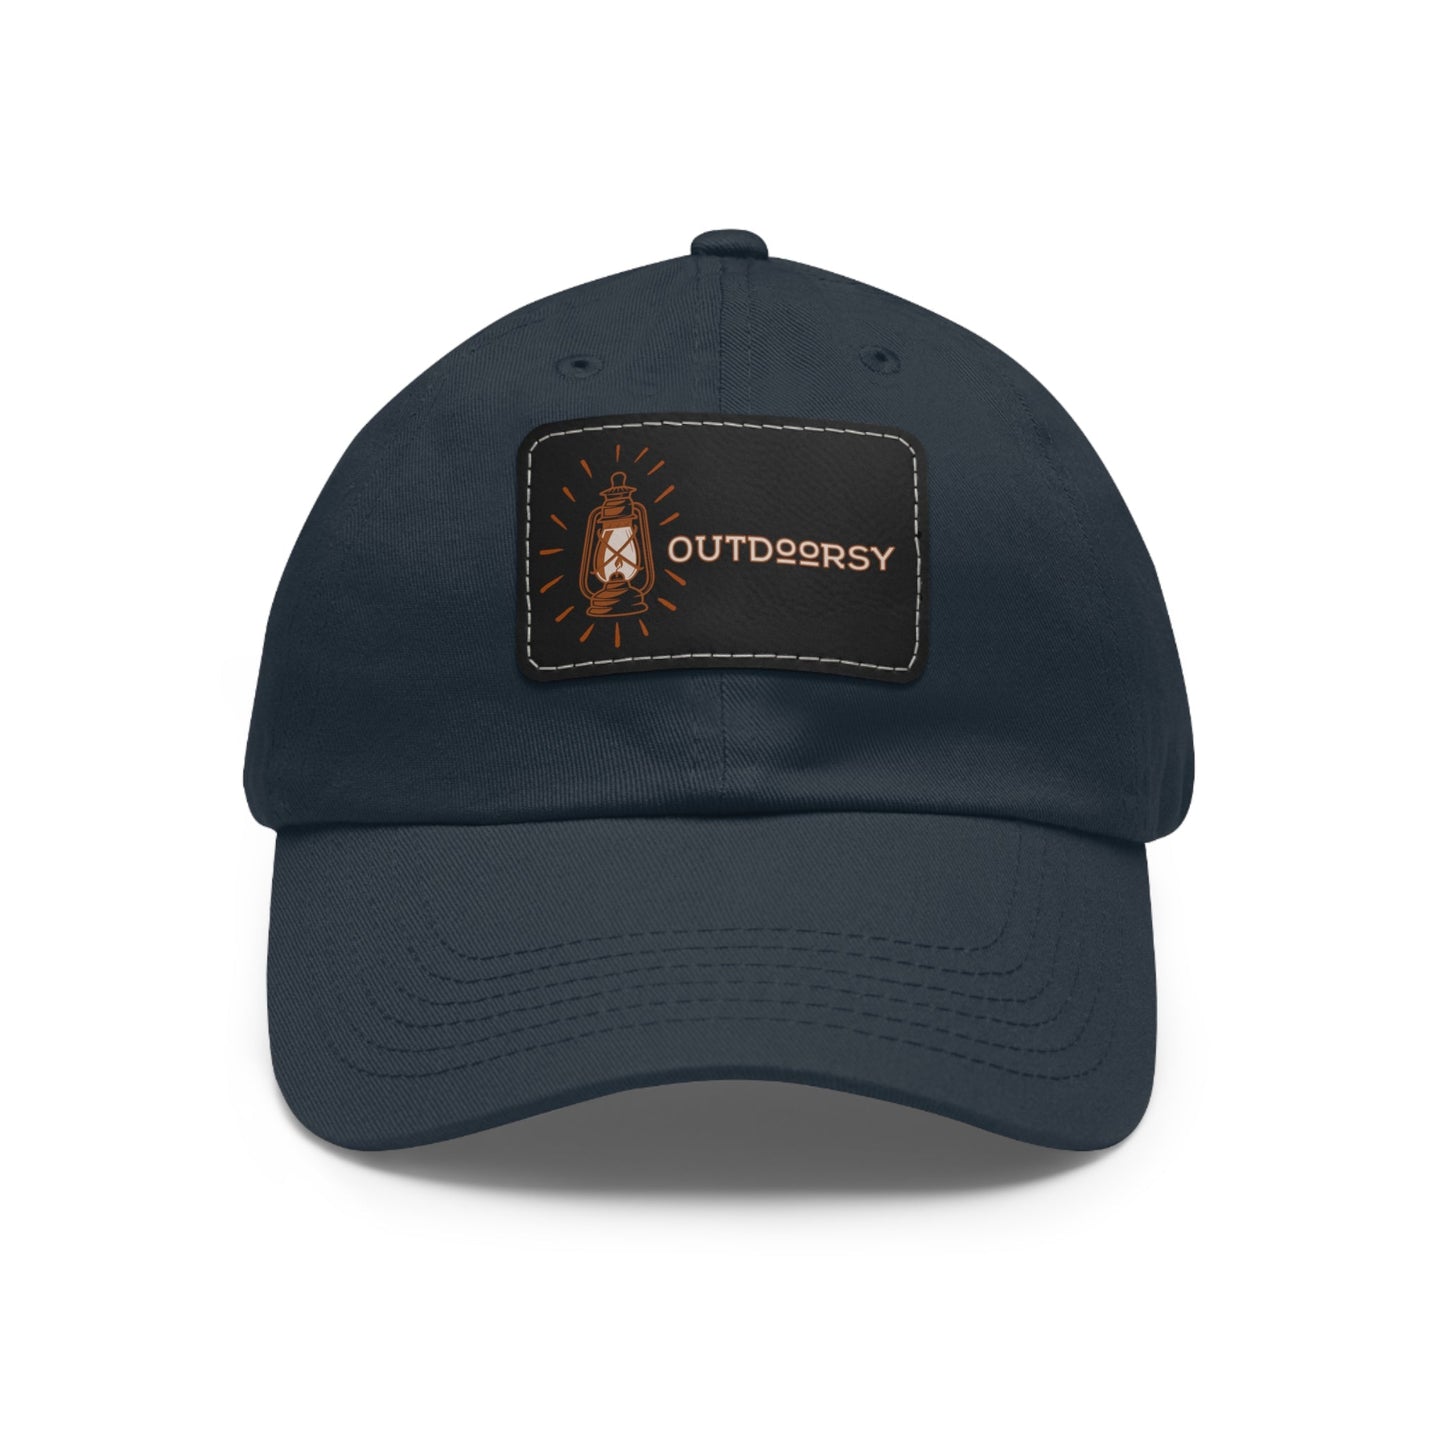 Outdoorsy Dad Hat with Leather Patch - Appalachian Bittersweet - Hats